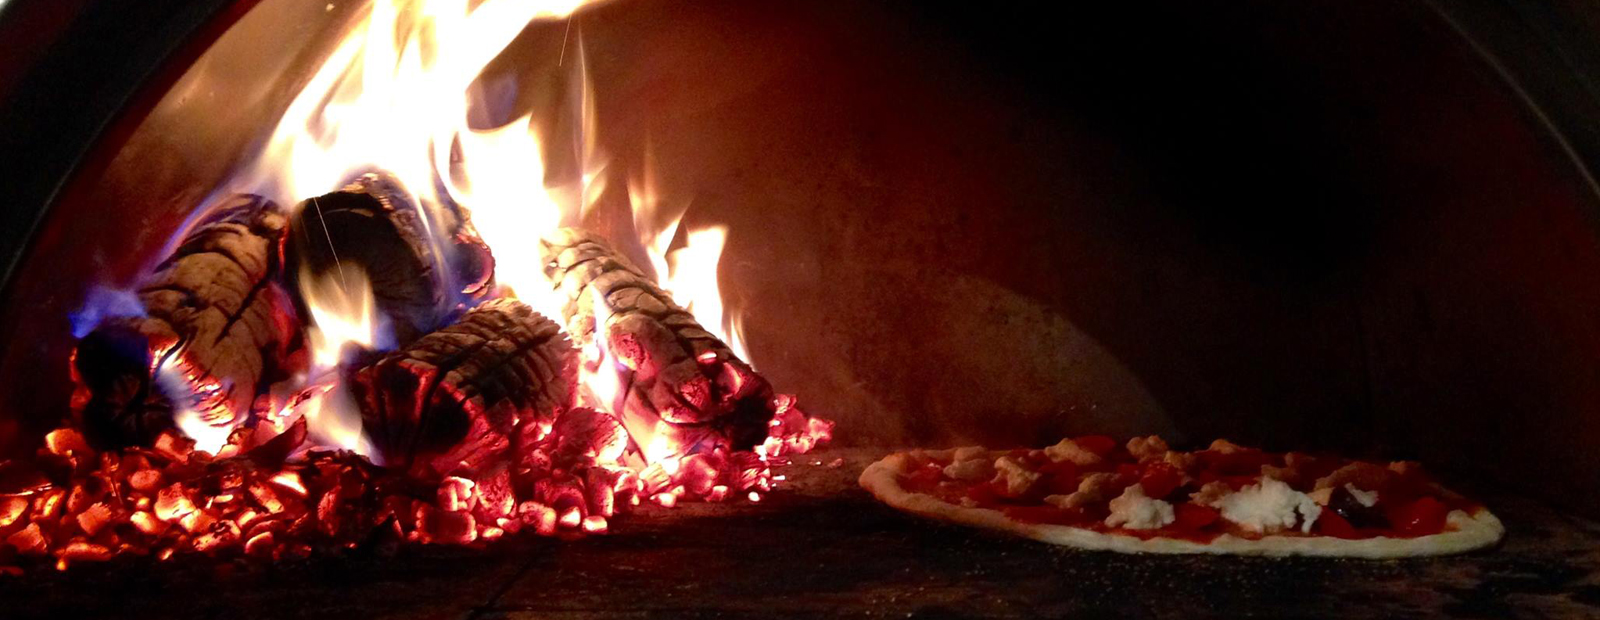 Copper Crust Co. wood-fired pizza.